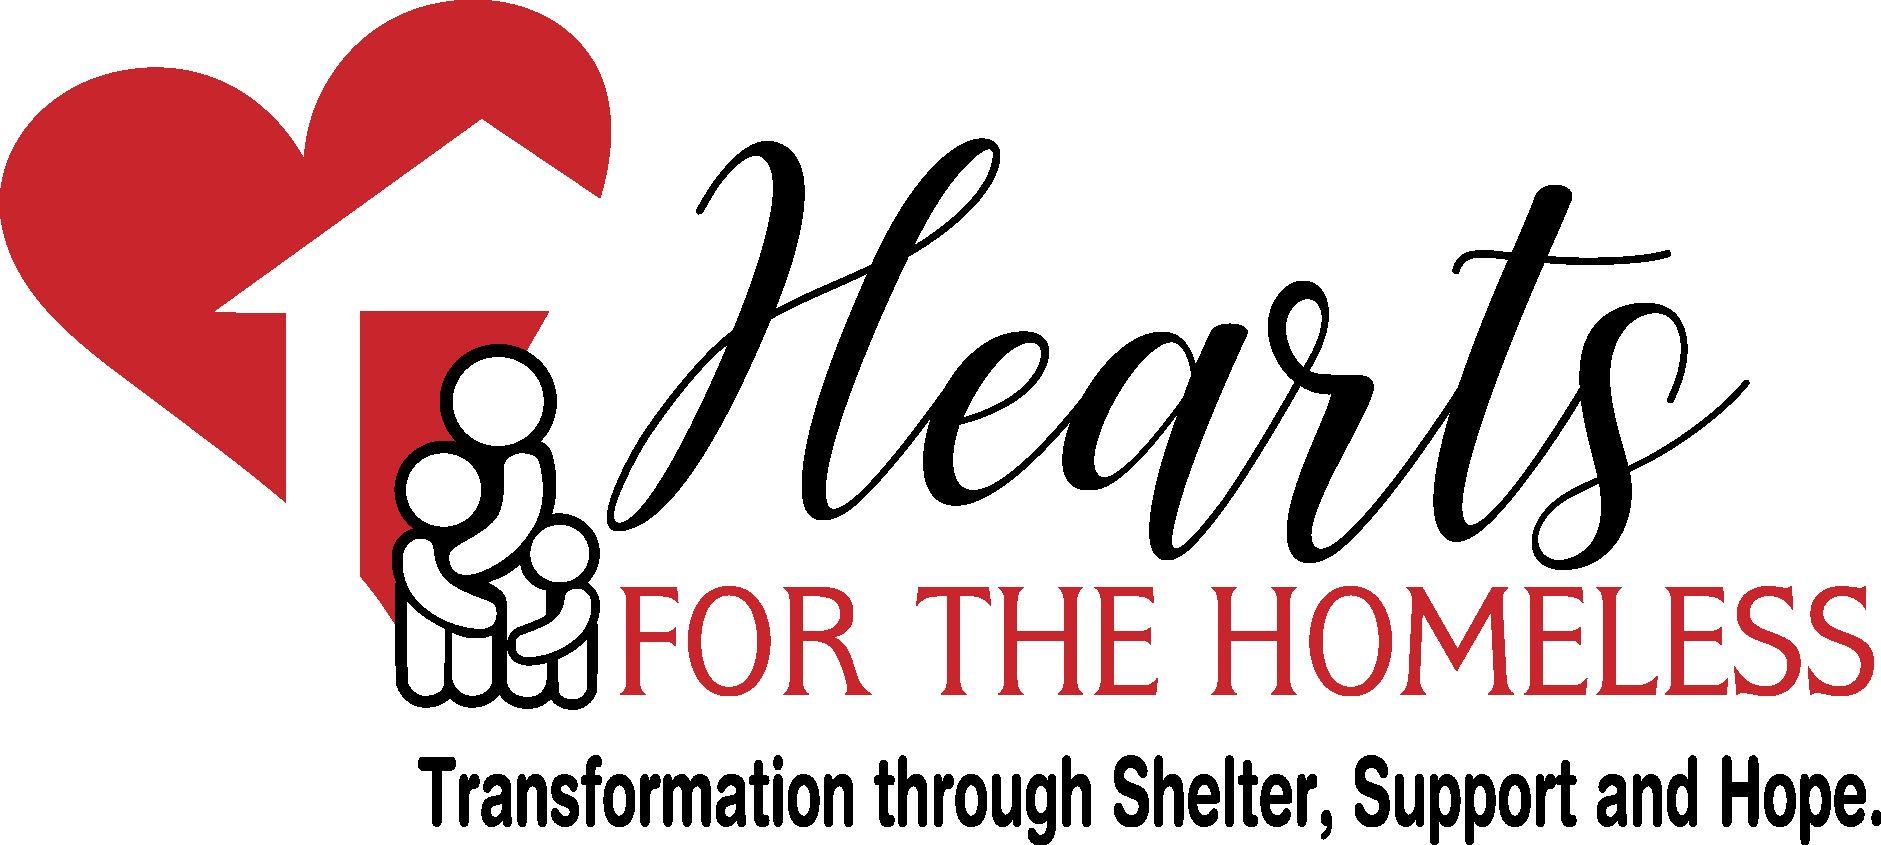 Homeless Logo - Hearts for the Homeless Logo Final - Shelter from the Storm